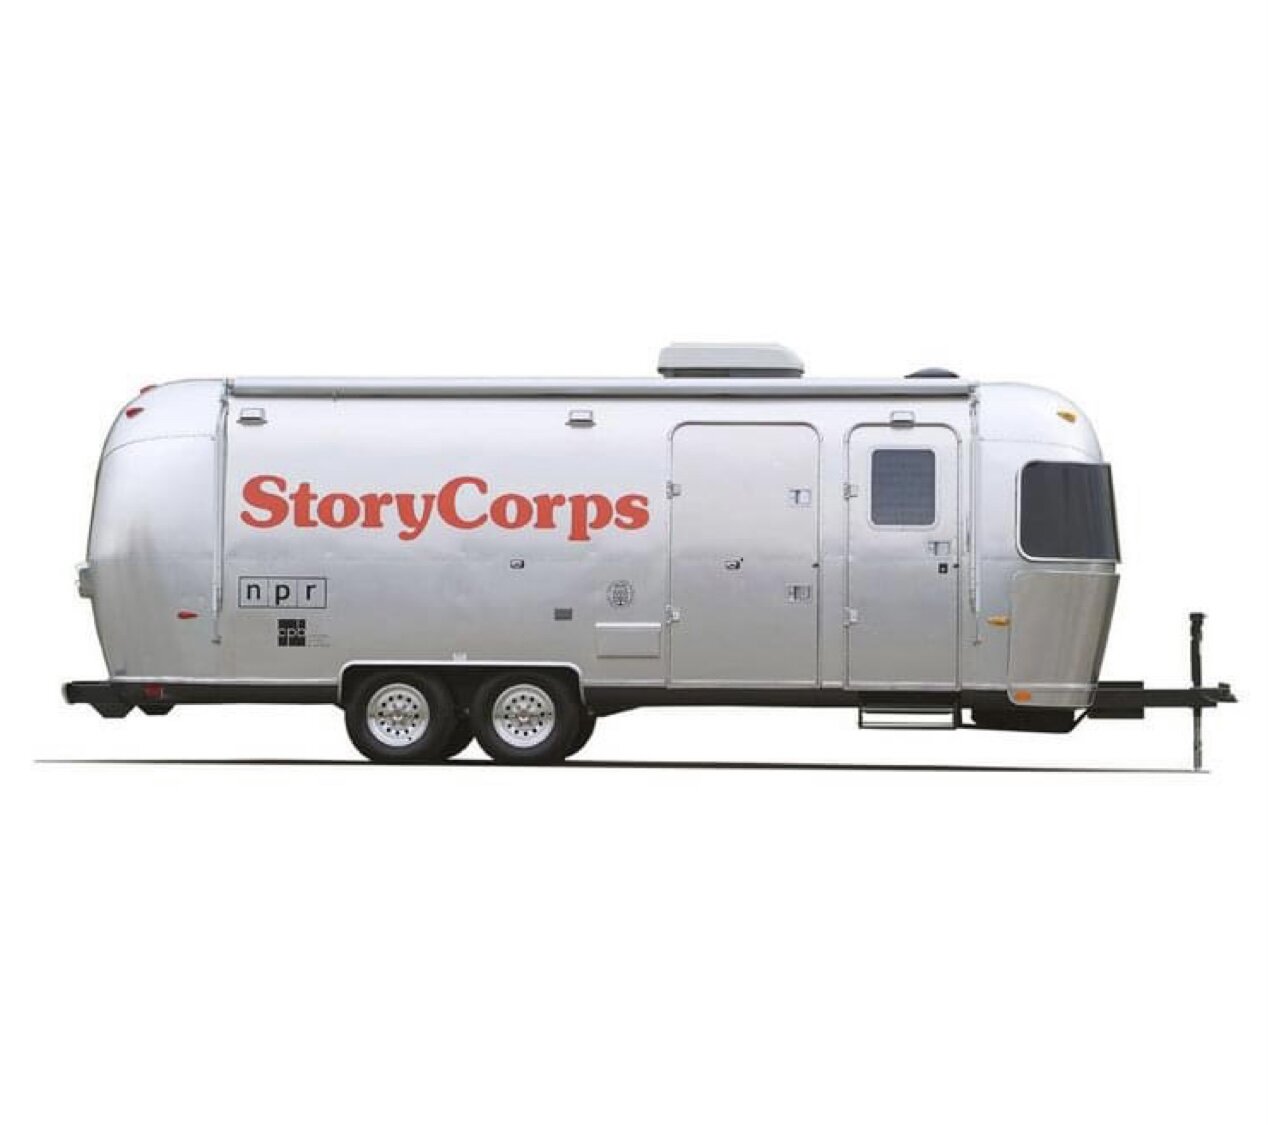 icon for website - StoryCorps caravan square.jpg